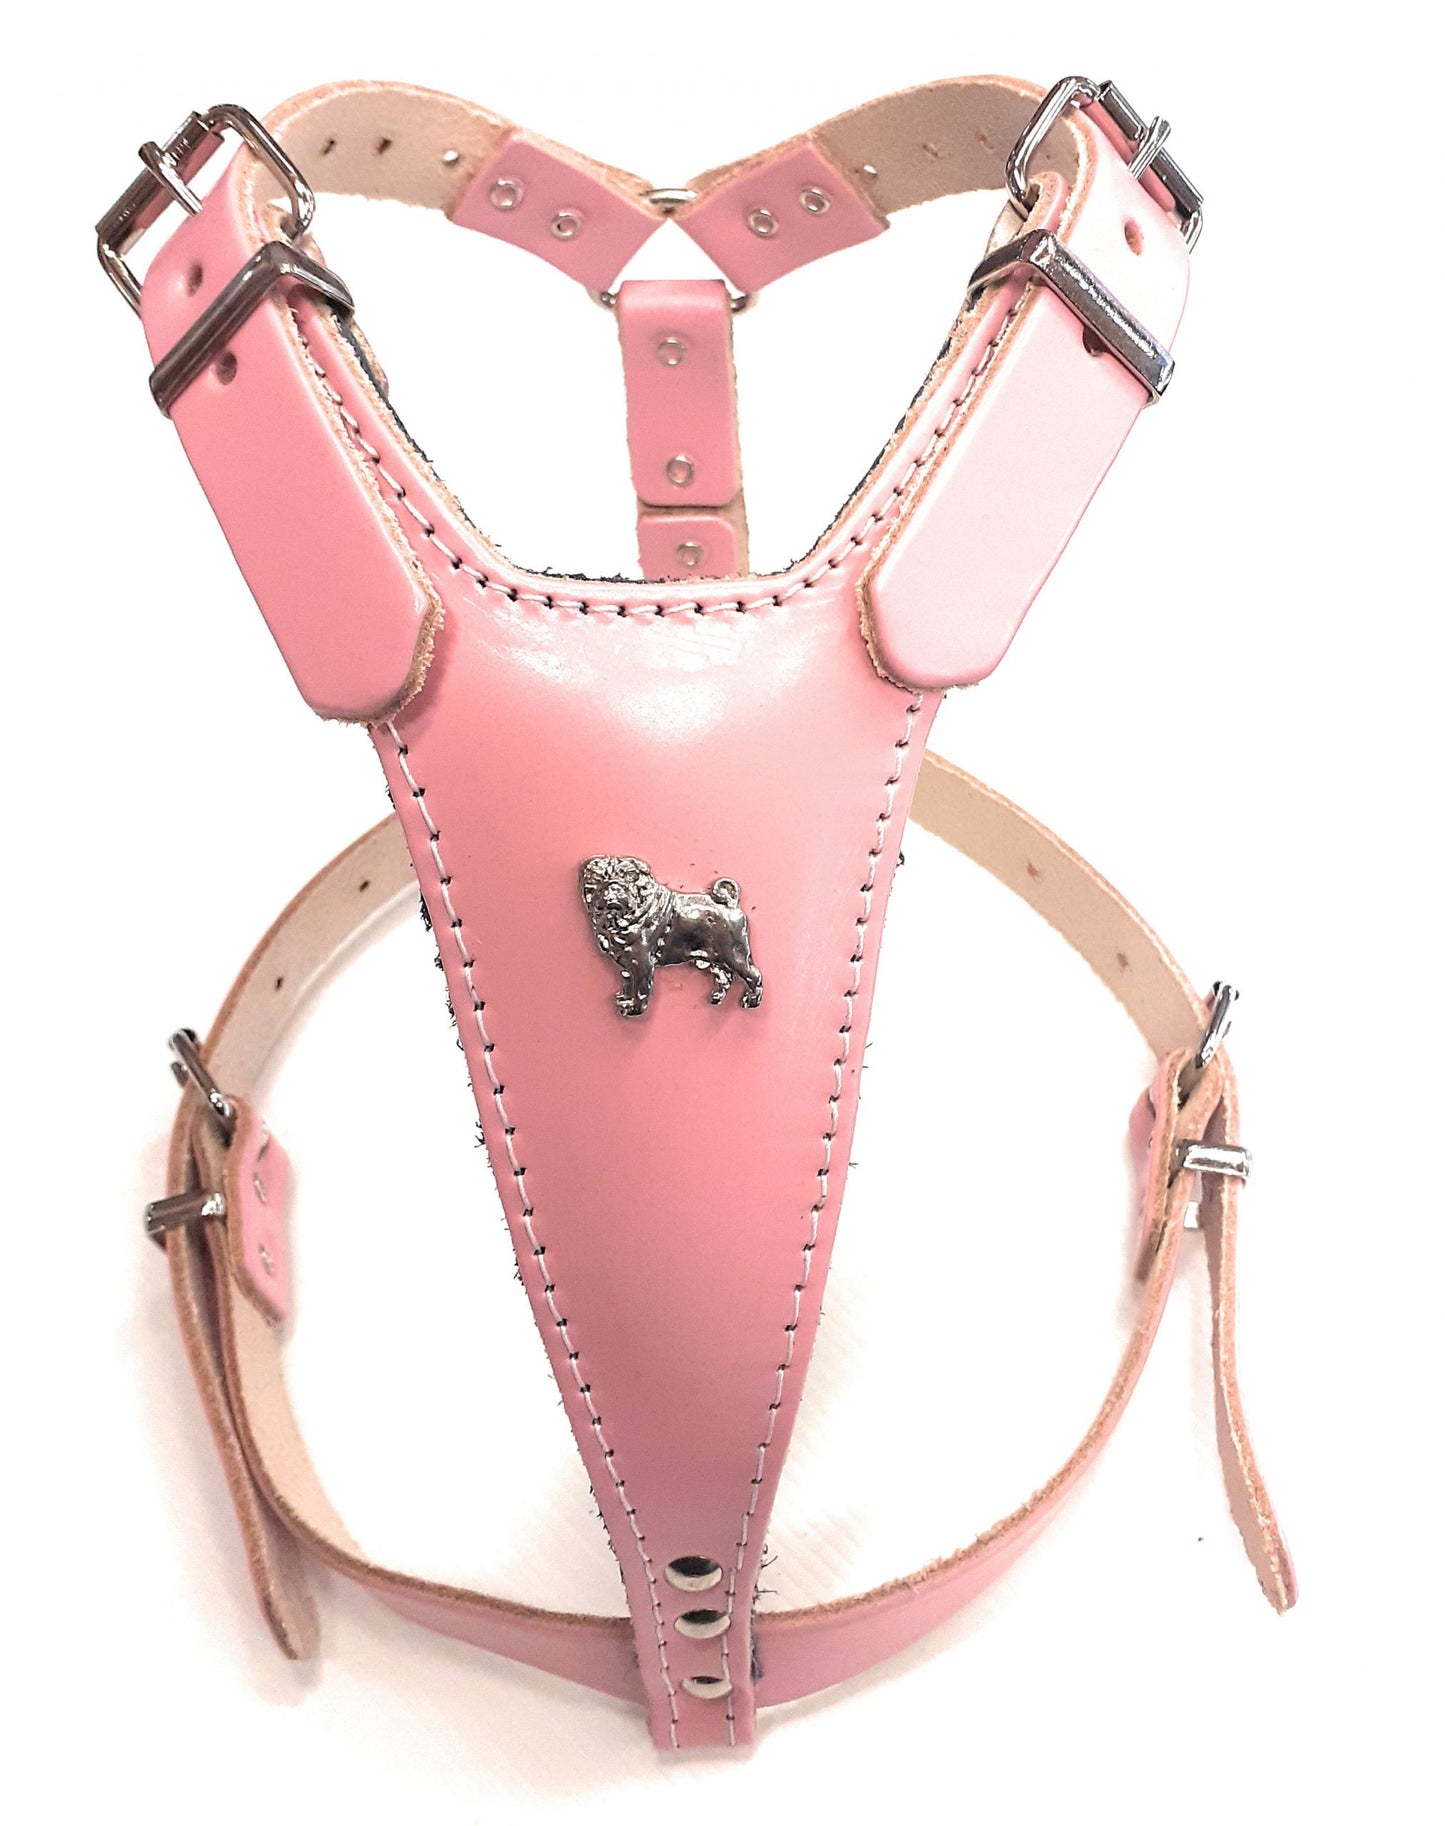 Baby Pink Leather Dog Harness with Pug Head Motif